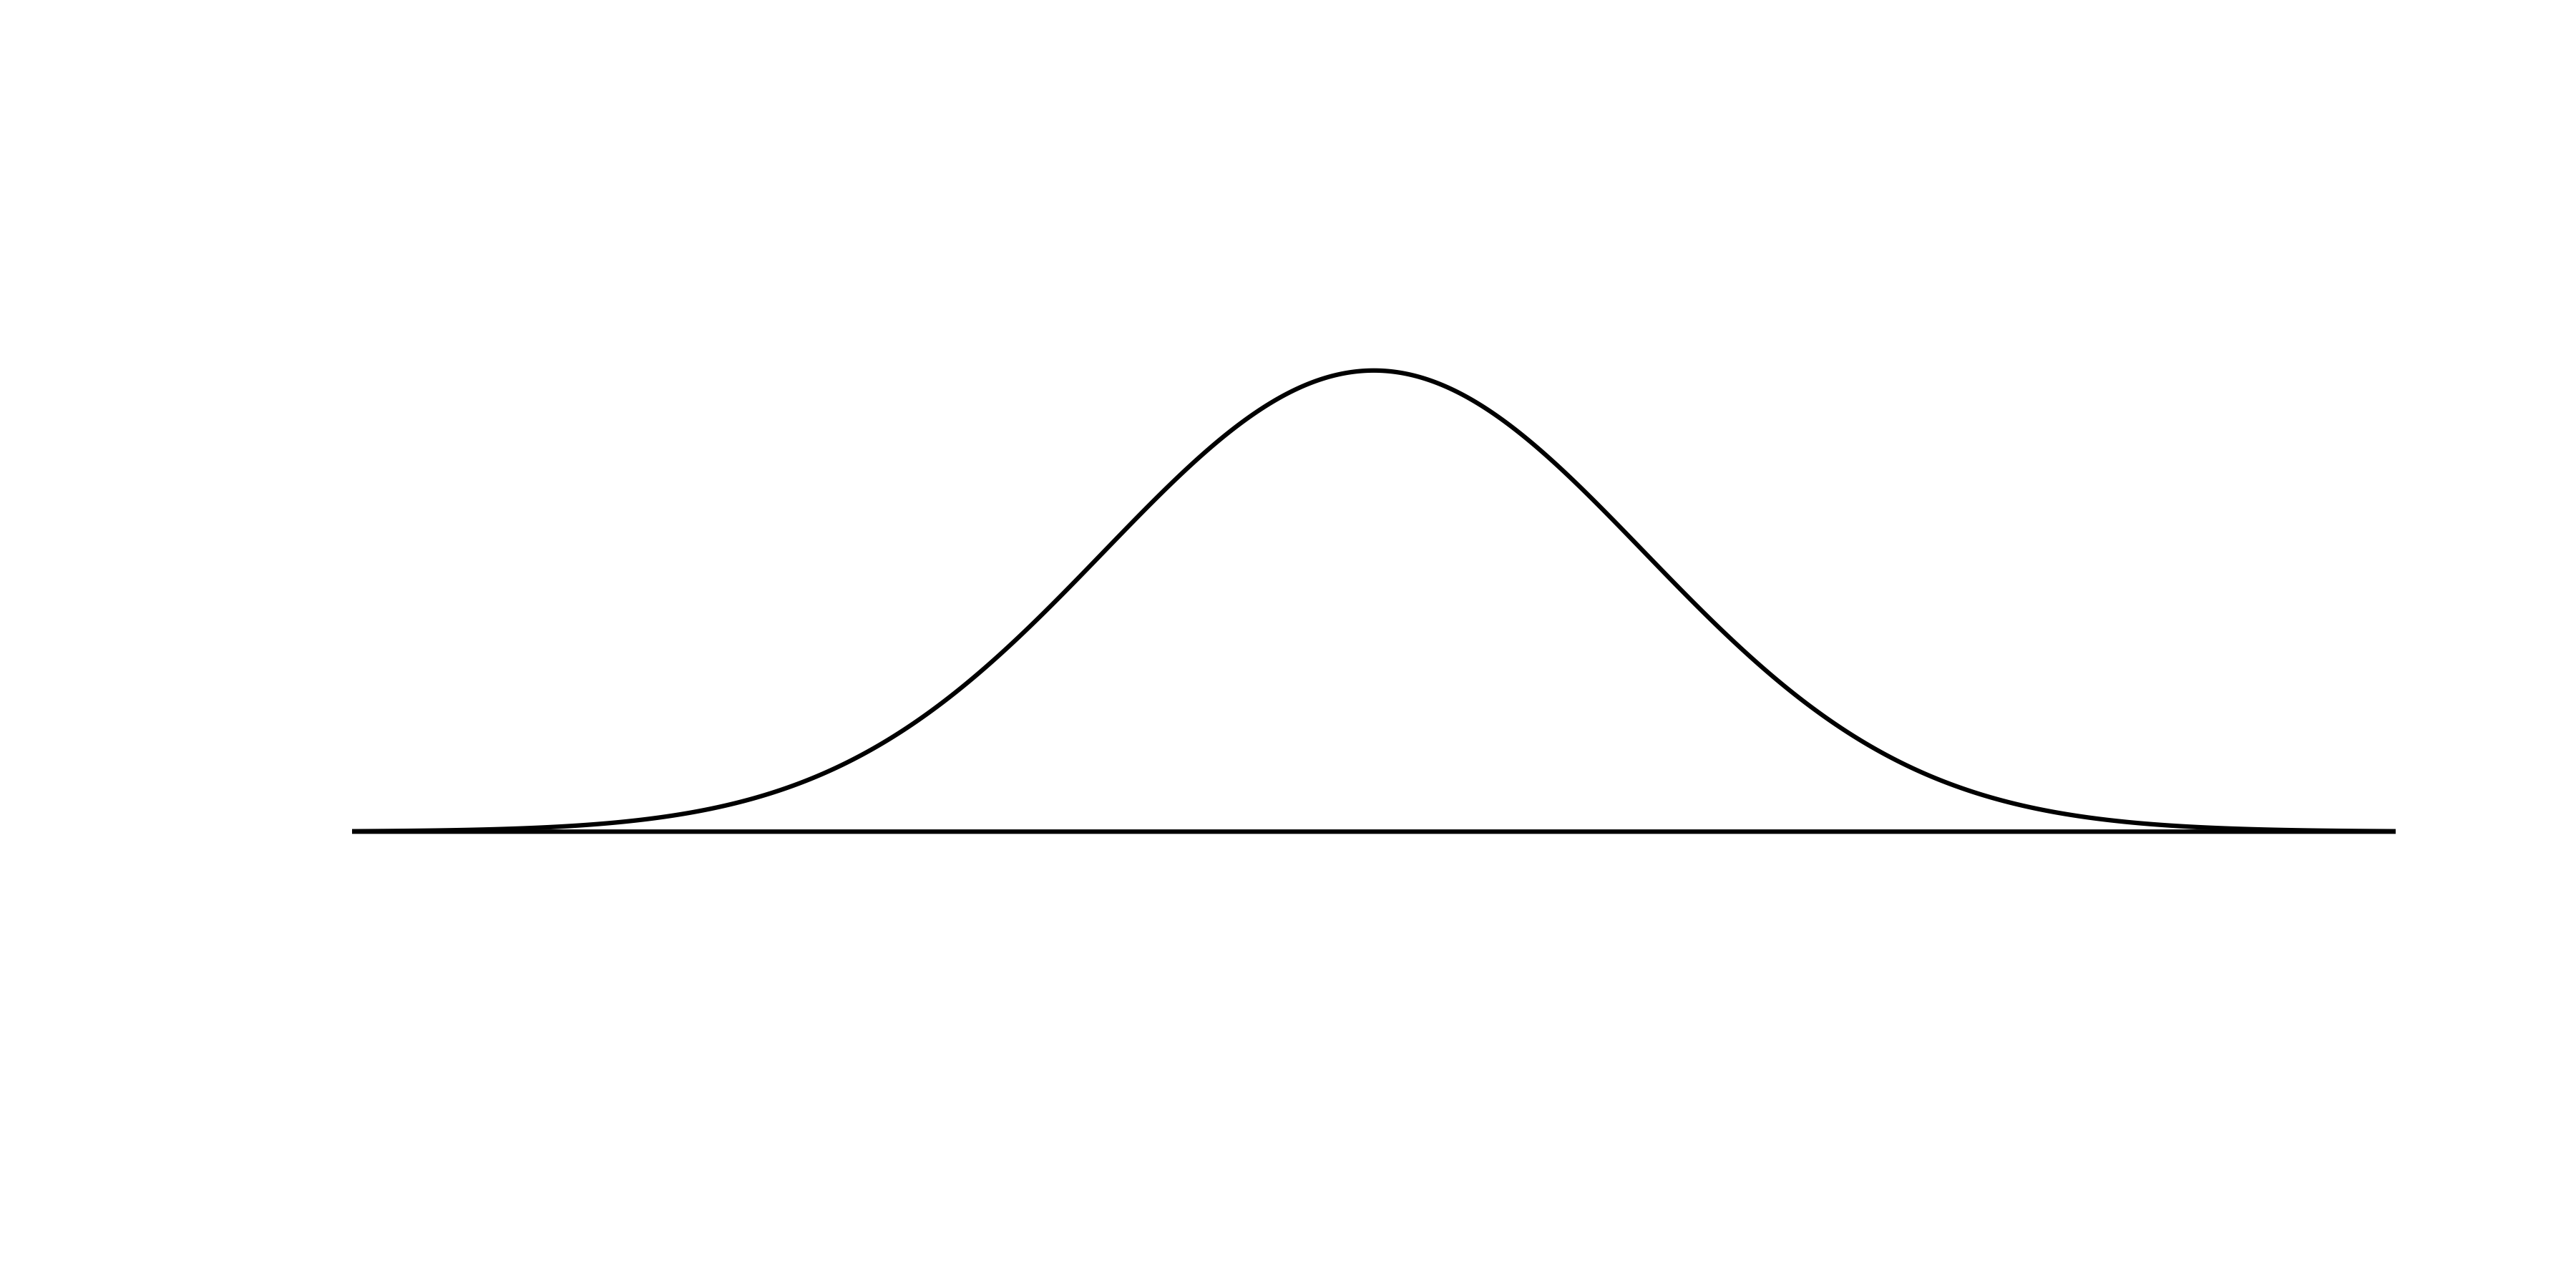 A normal curve centered at 0 with a standard deviation of one.